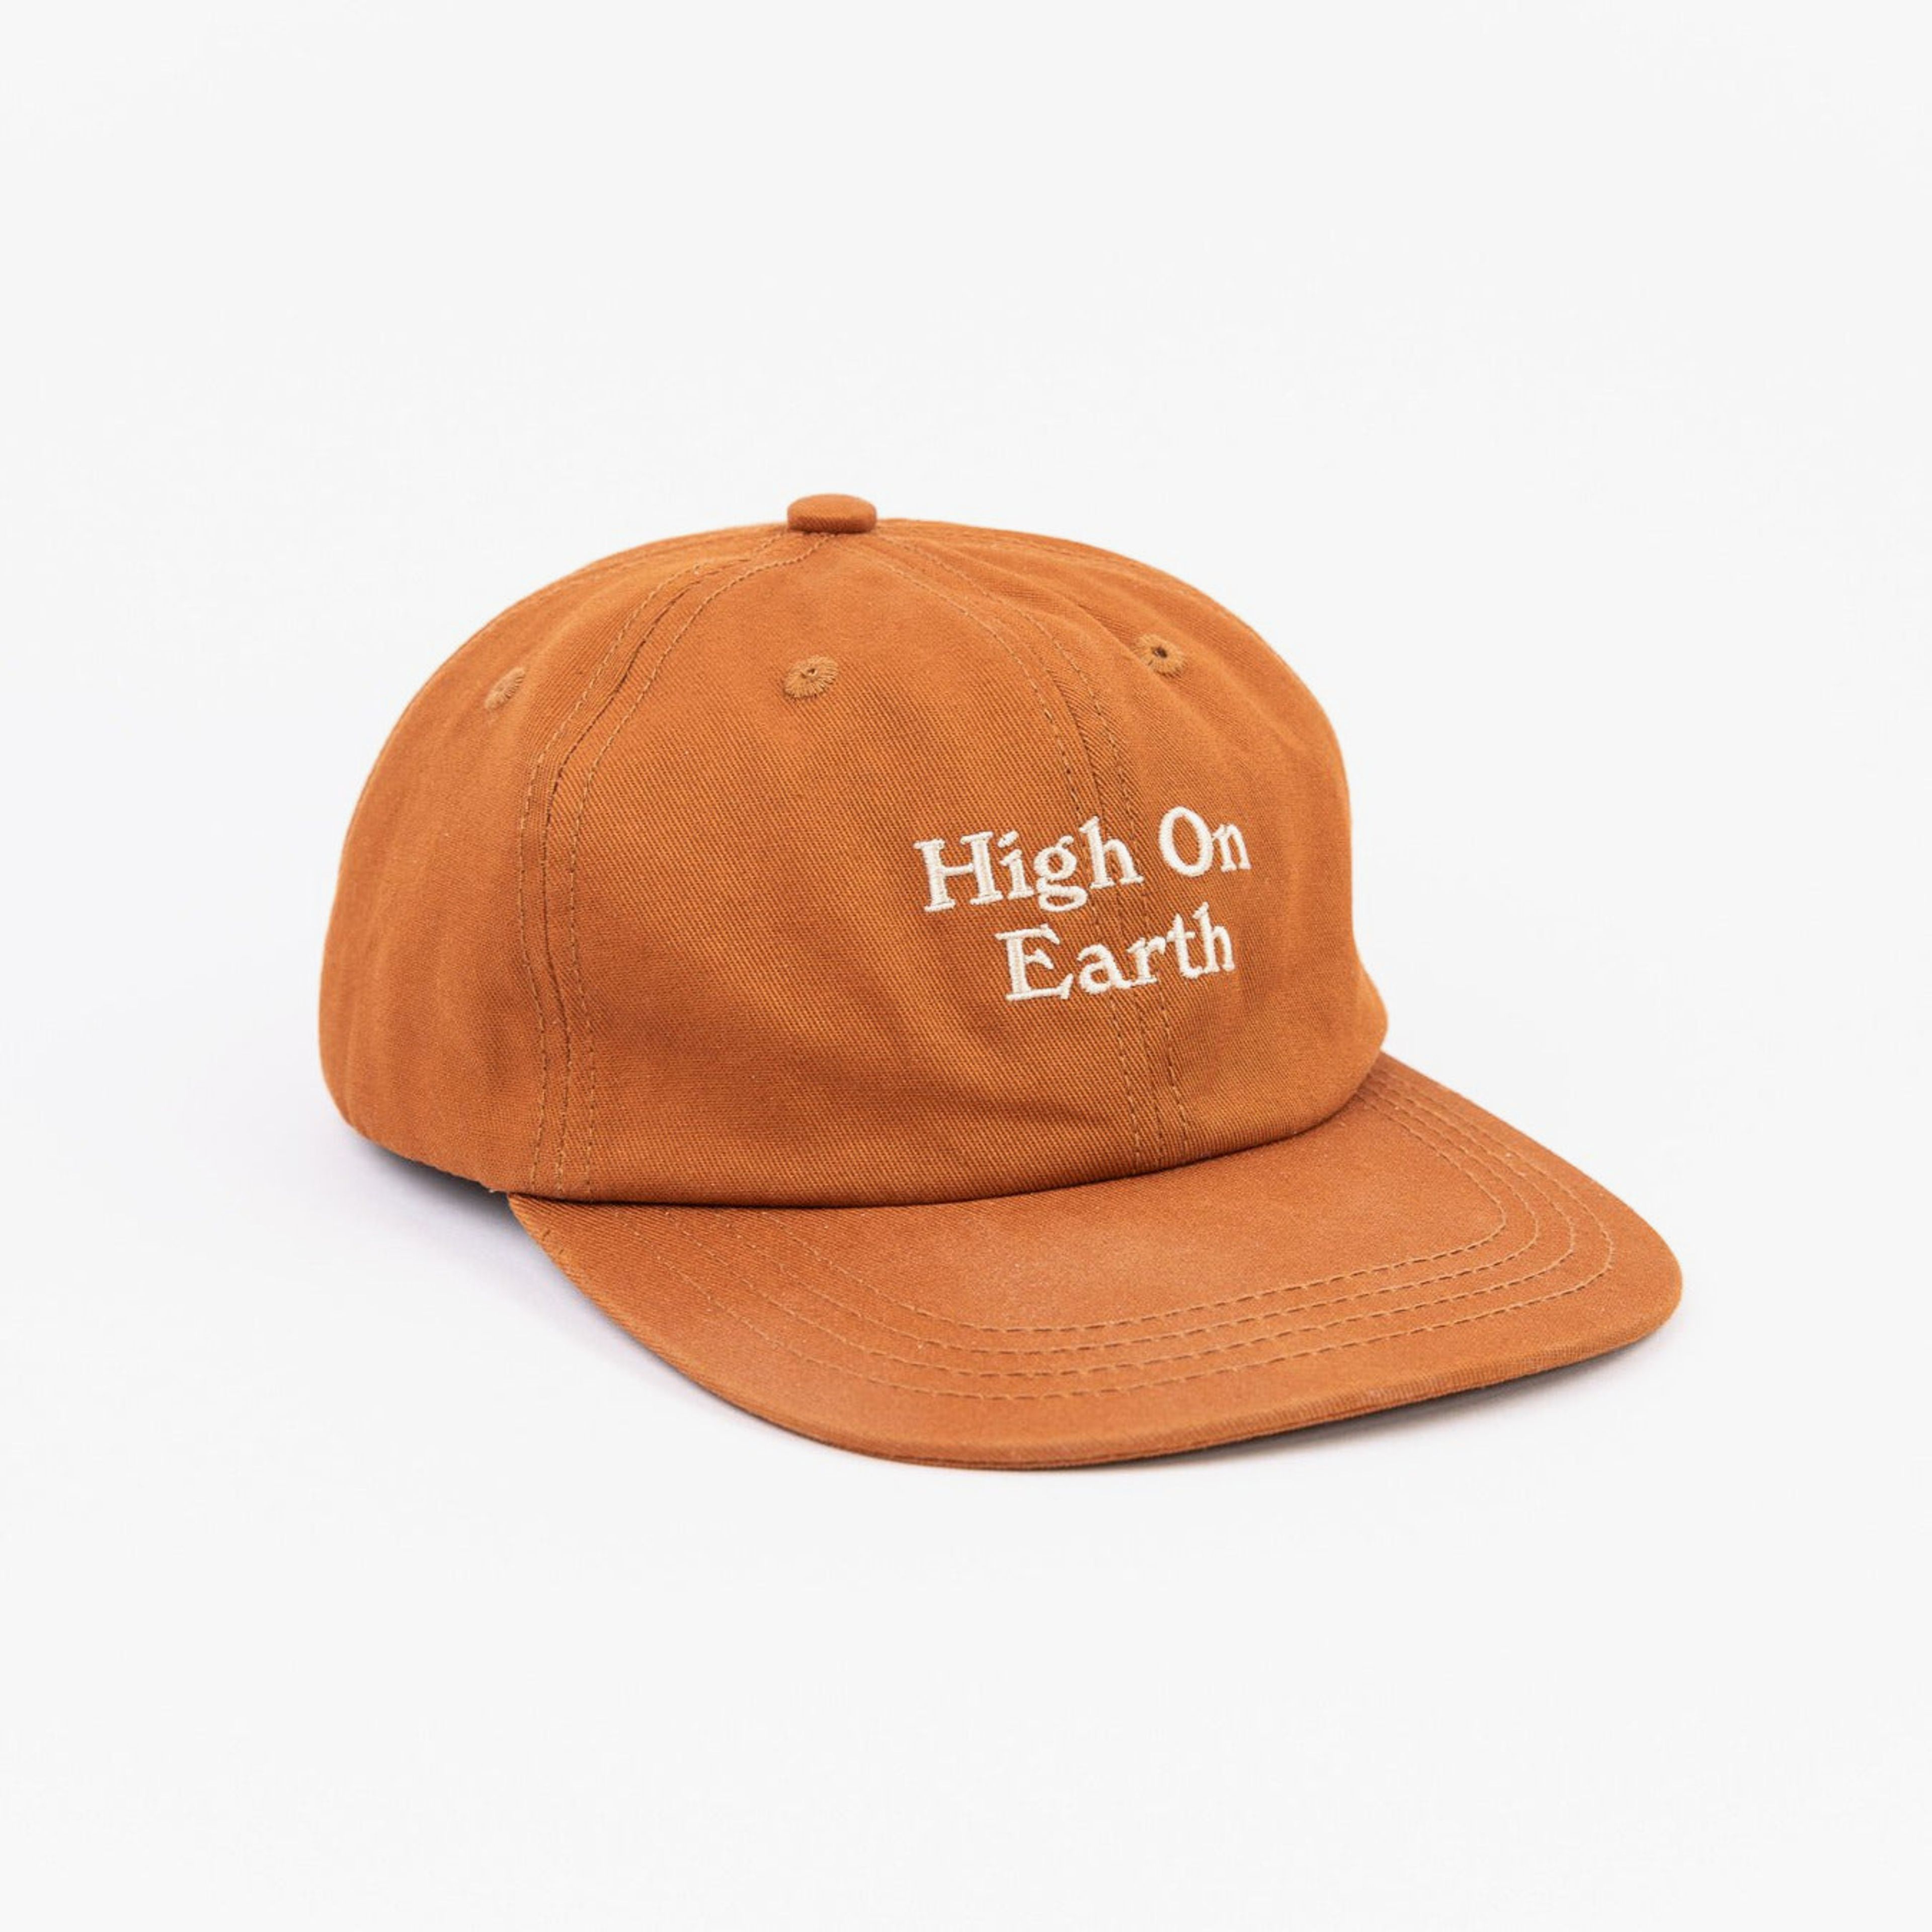 High On Earth hat